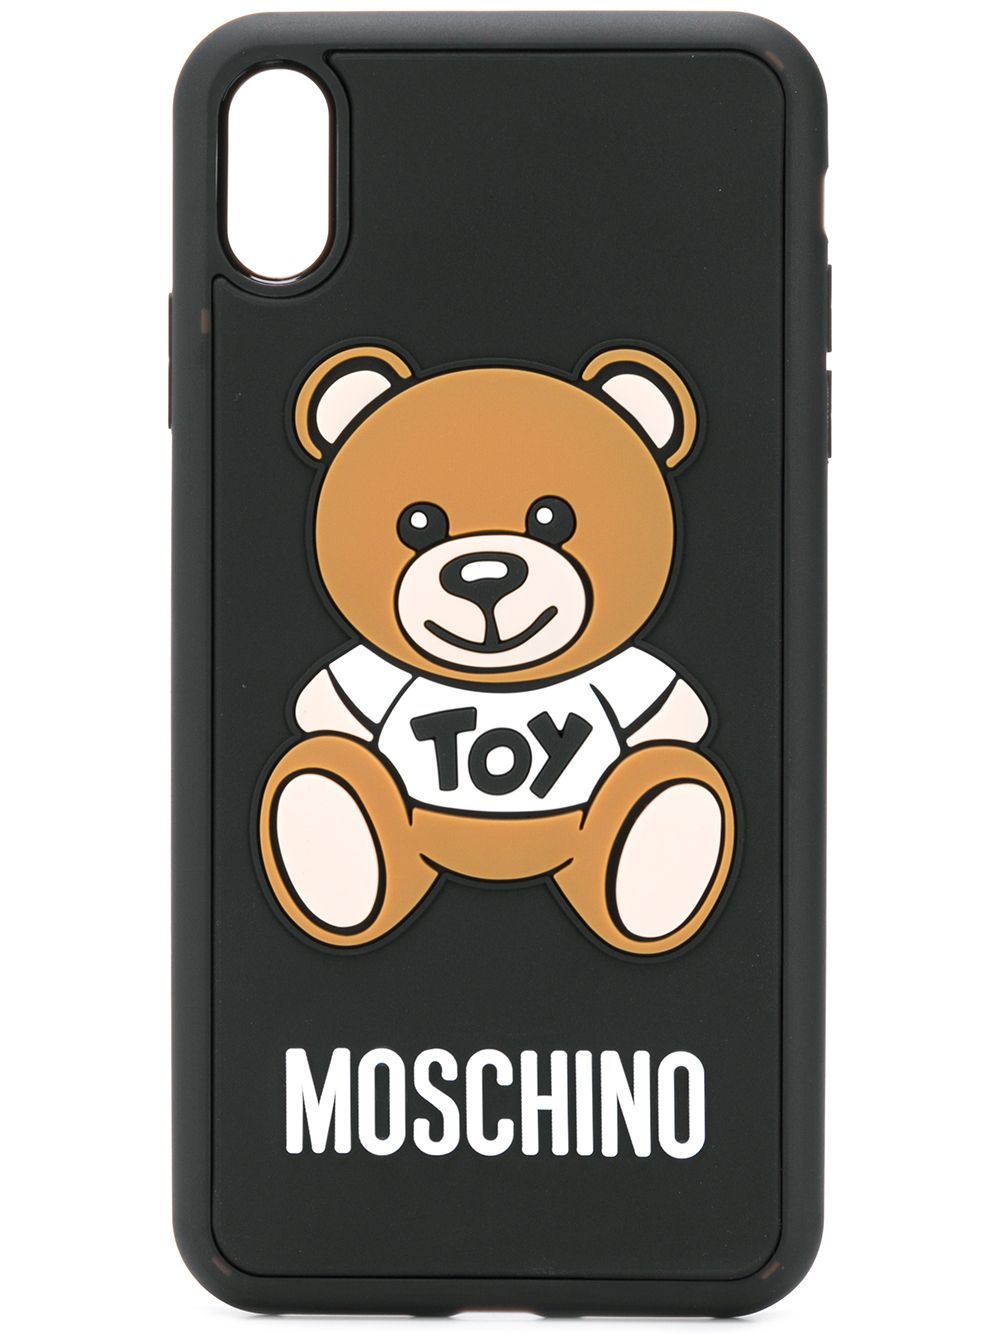 Toy Teddy iPhone XS Max case for women 